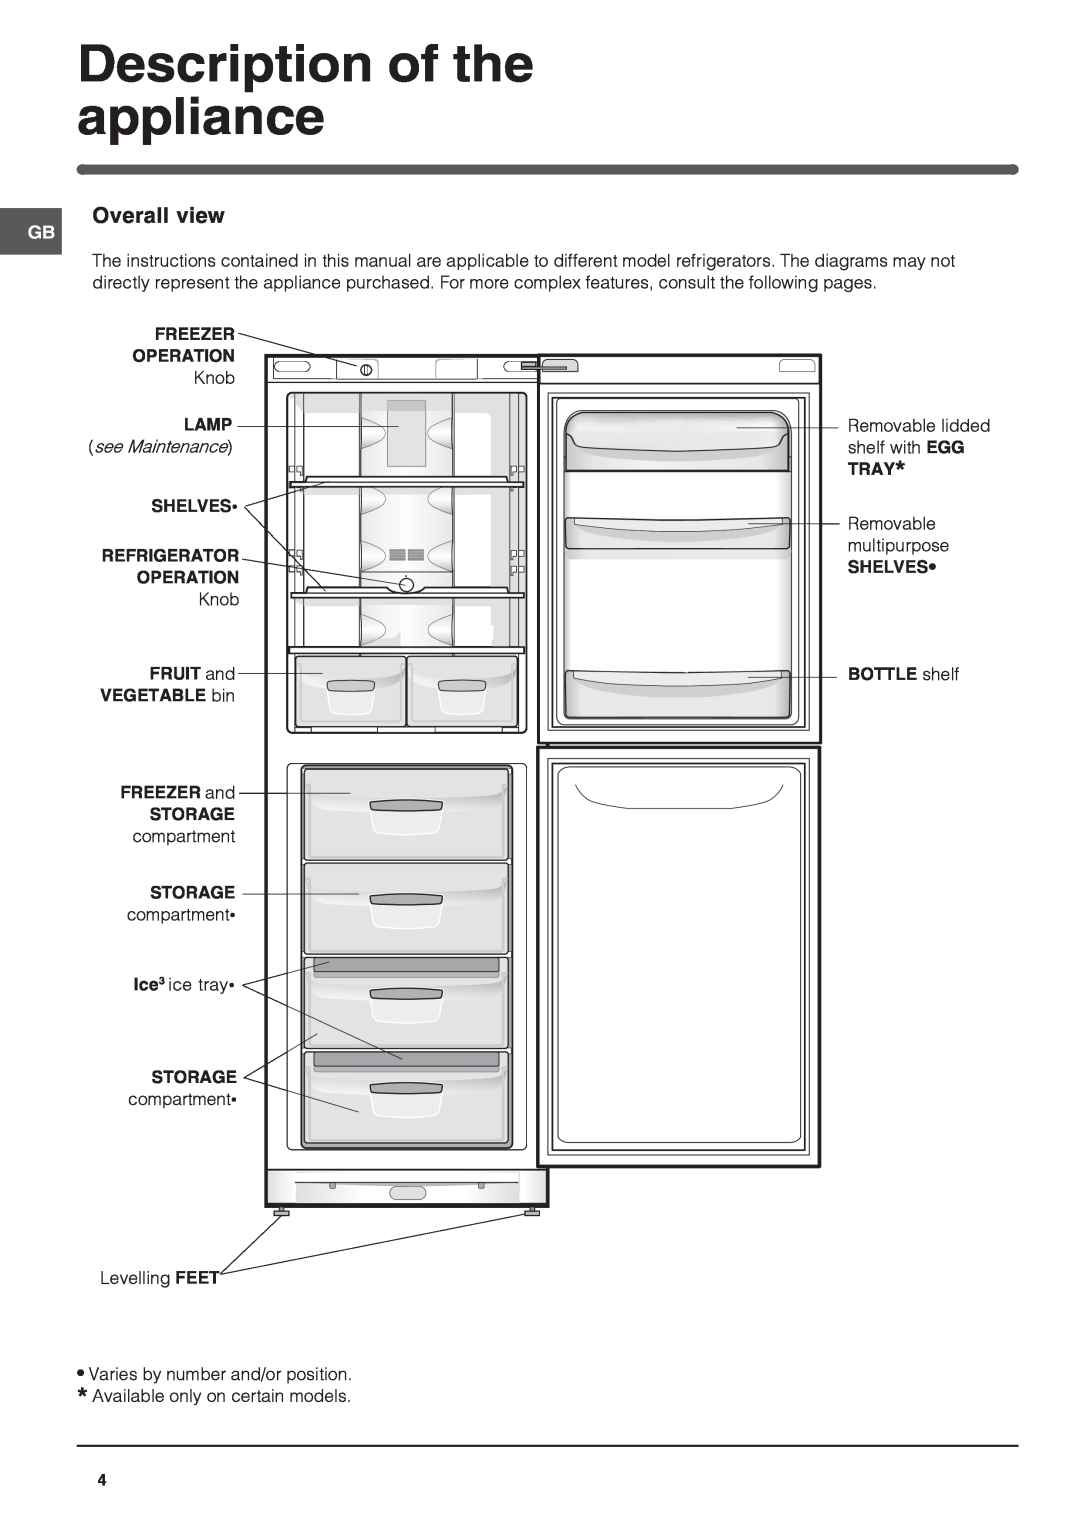 Indesit BAN 134 NF K operating instructions Description of the appliance, Overall view 